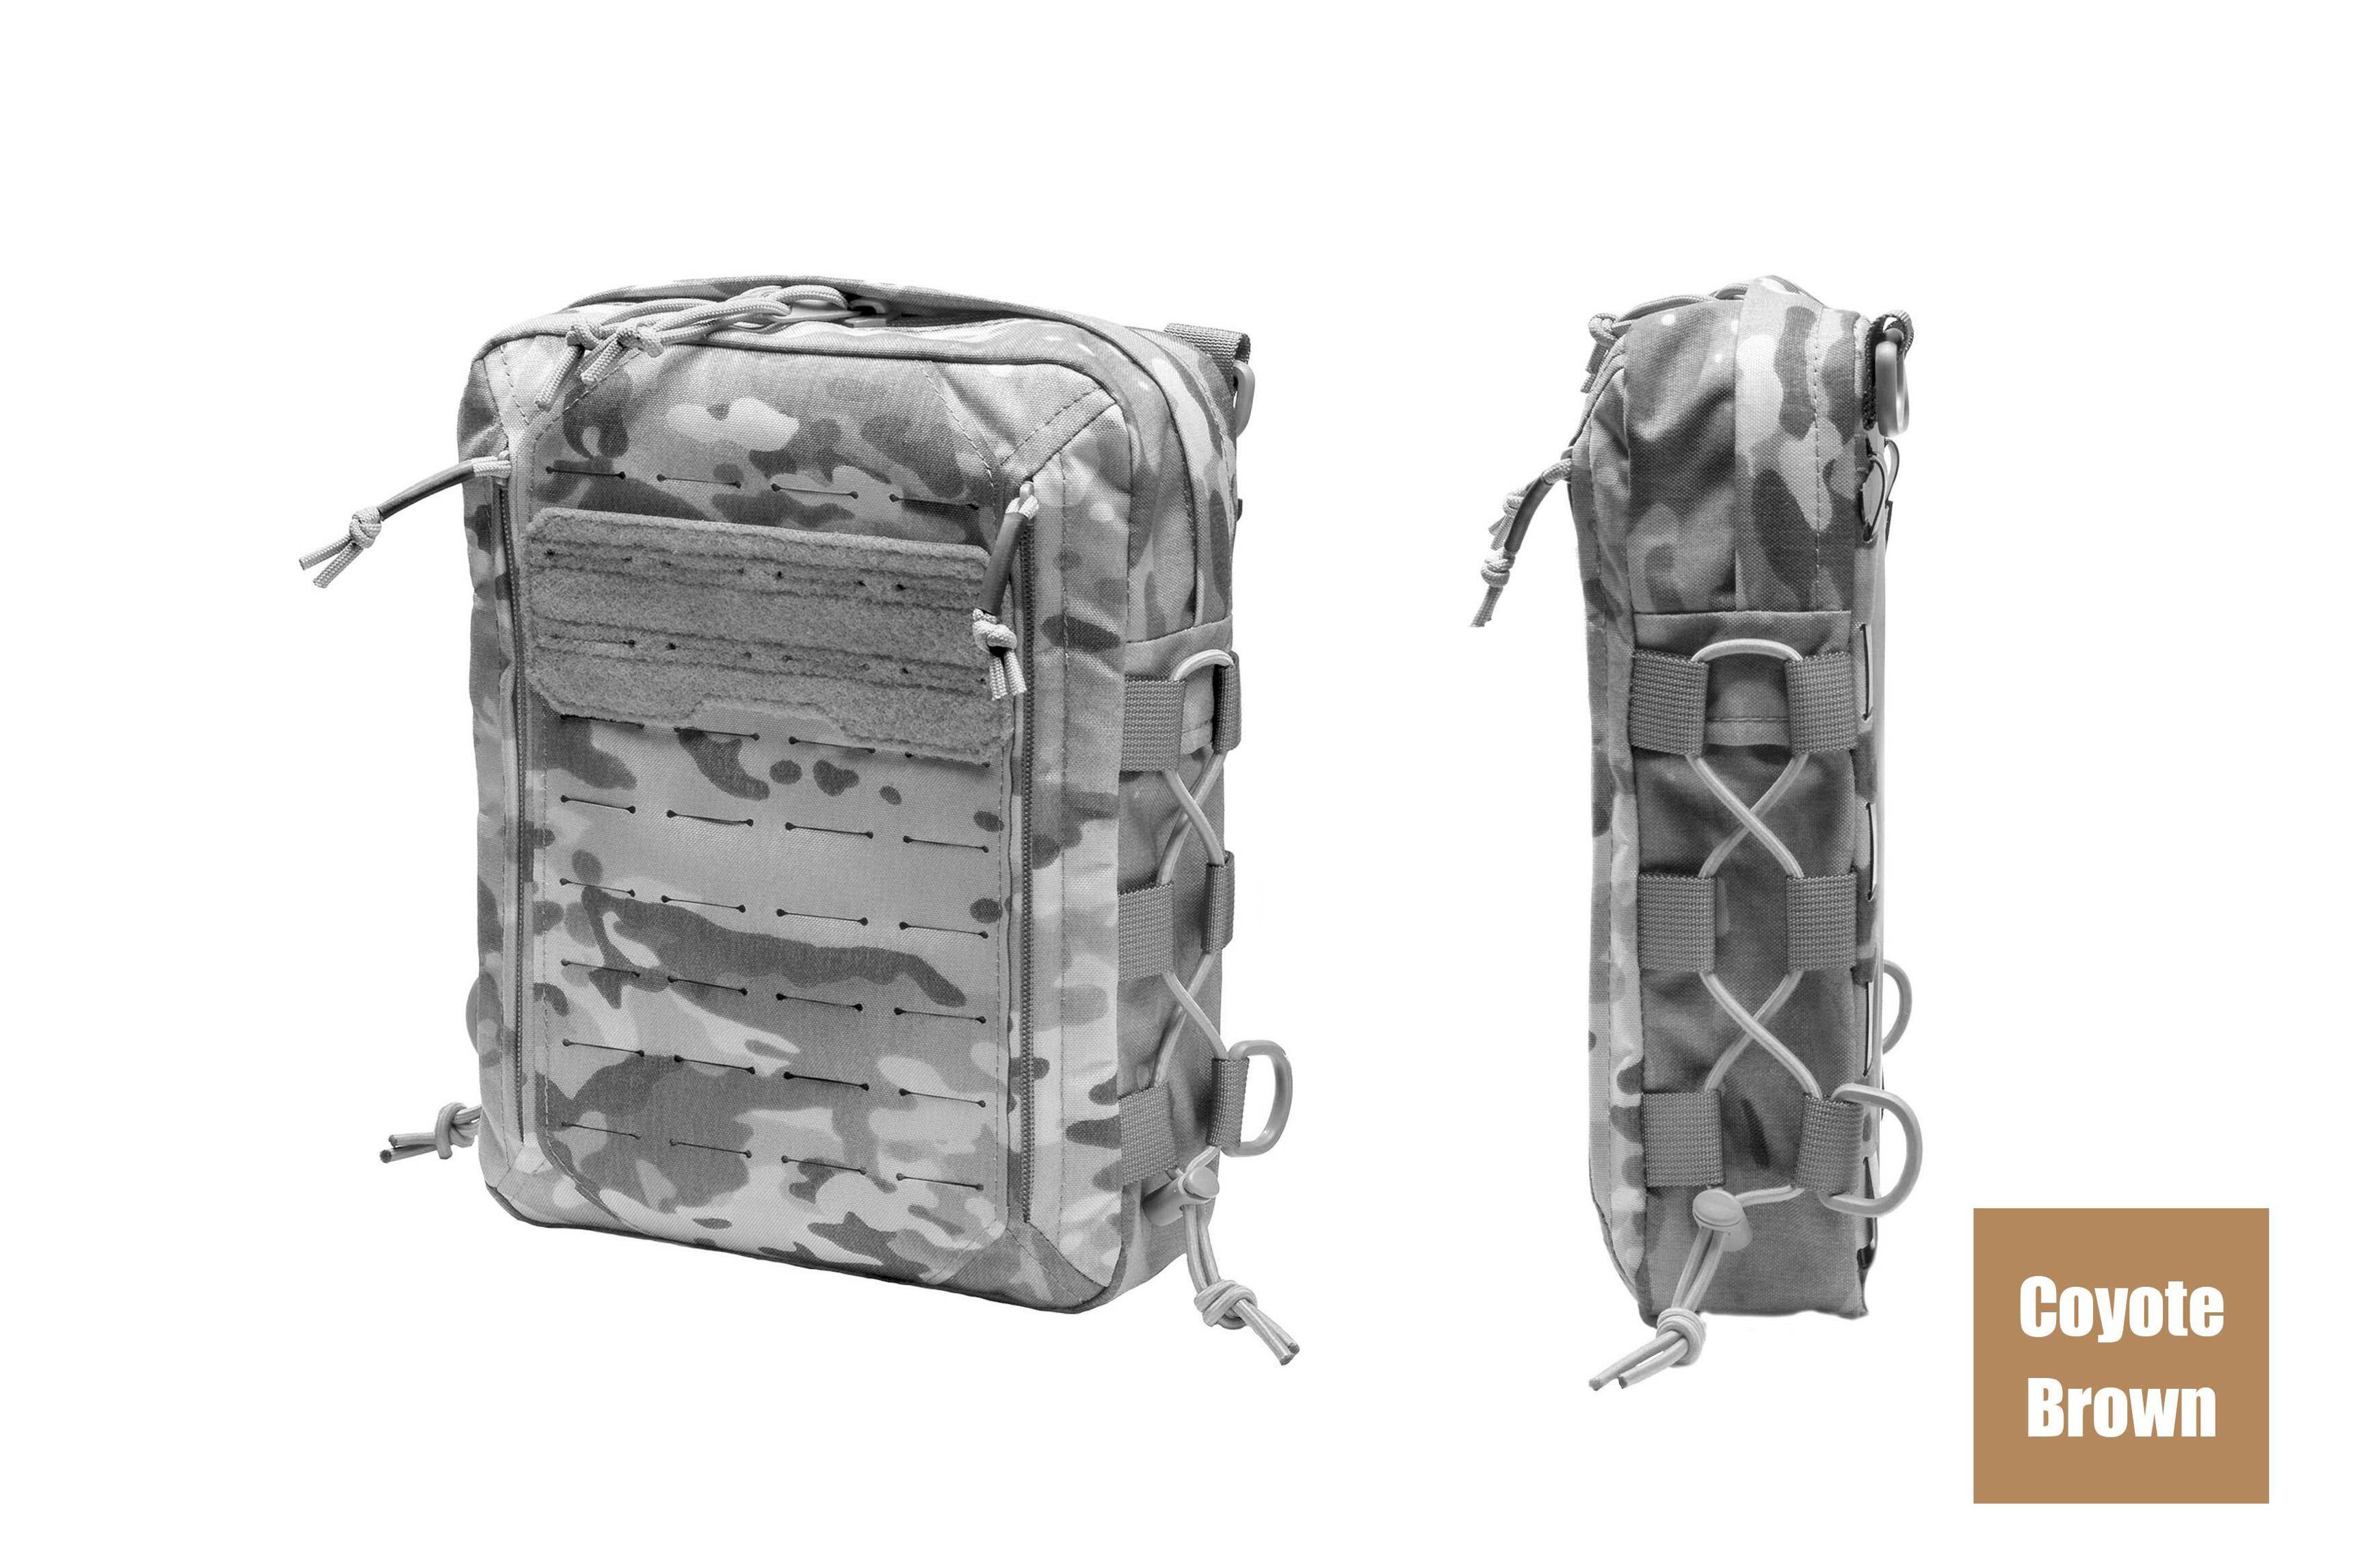 TG-HP Vest Pack H1 SMALL CB